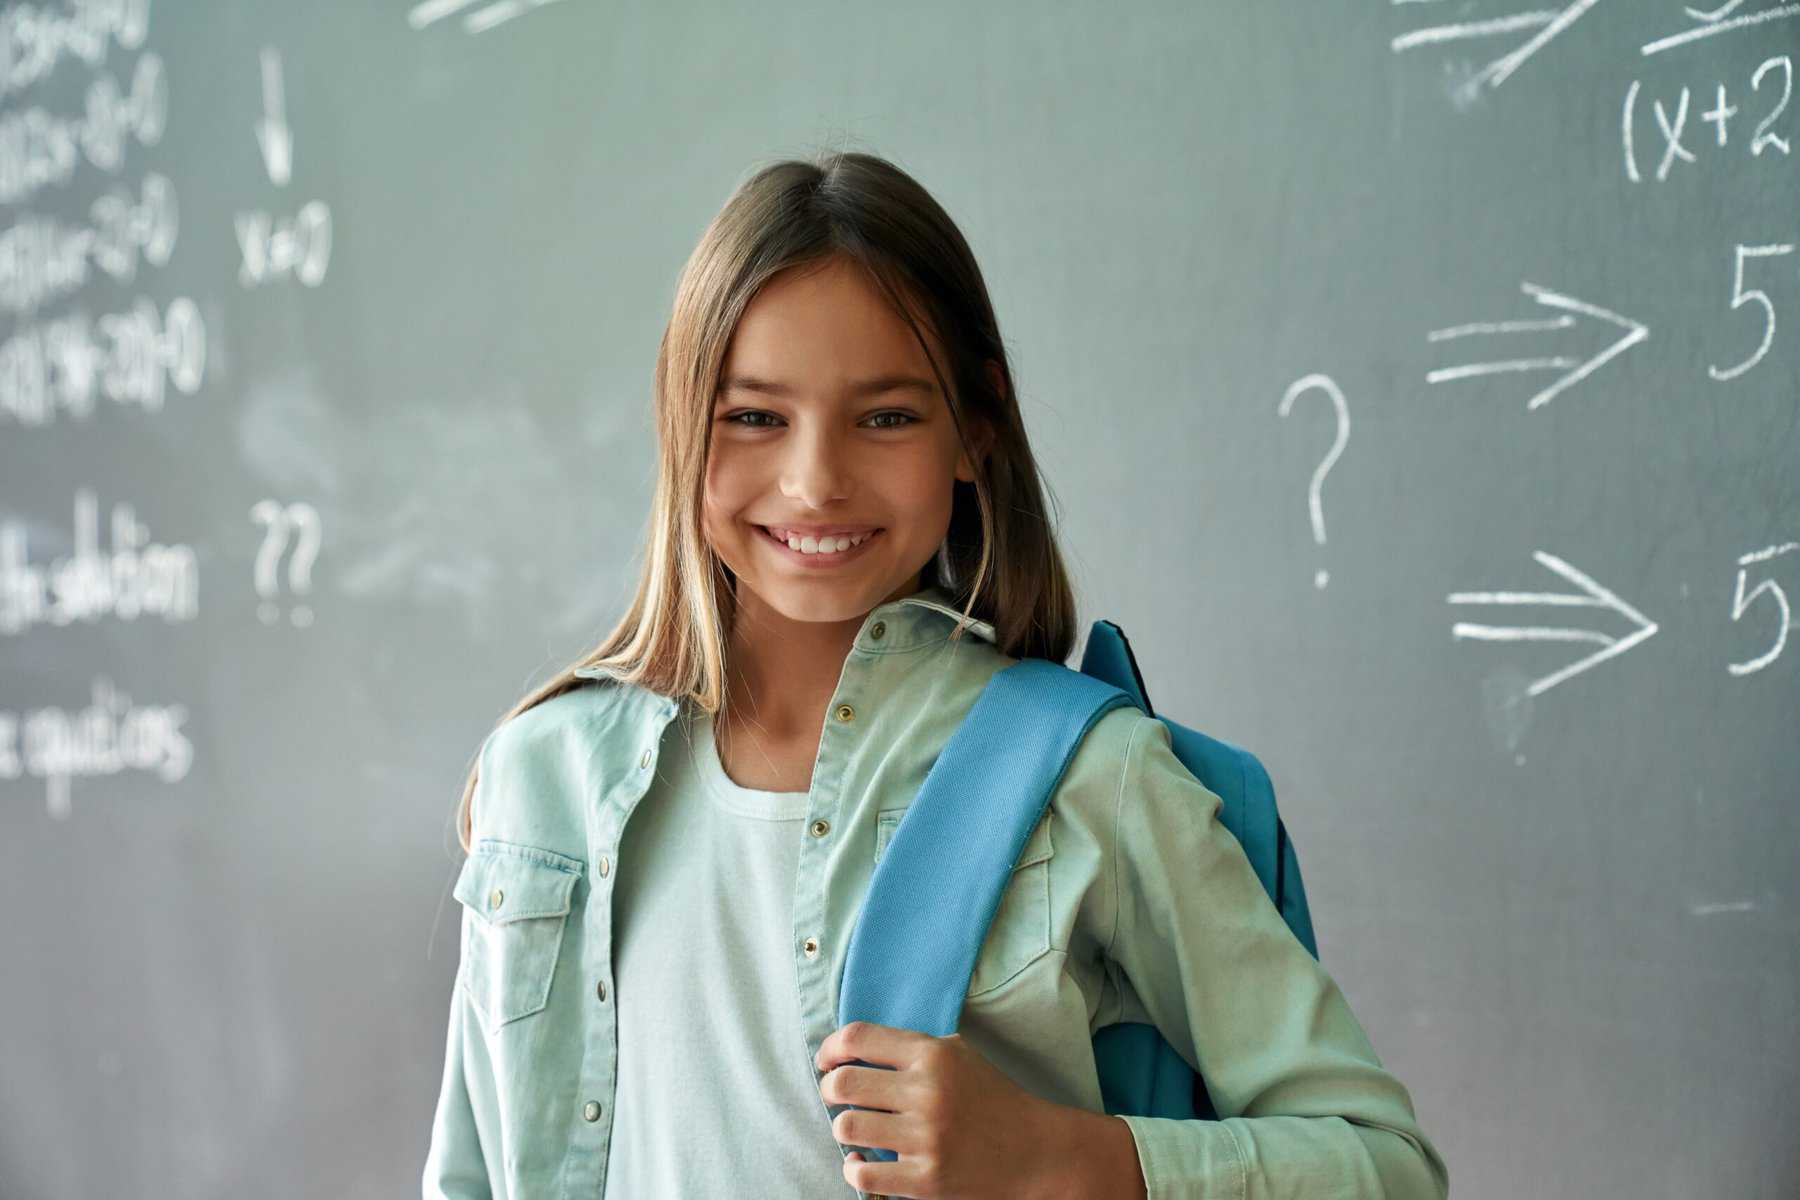 Young girl smiling in front of a blackboard